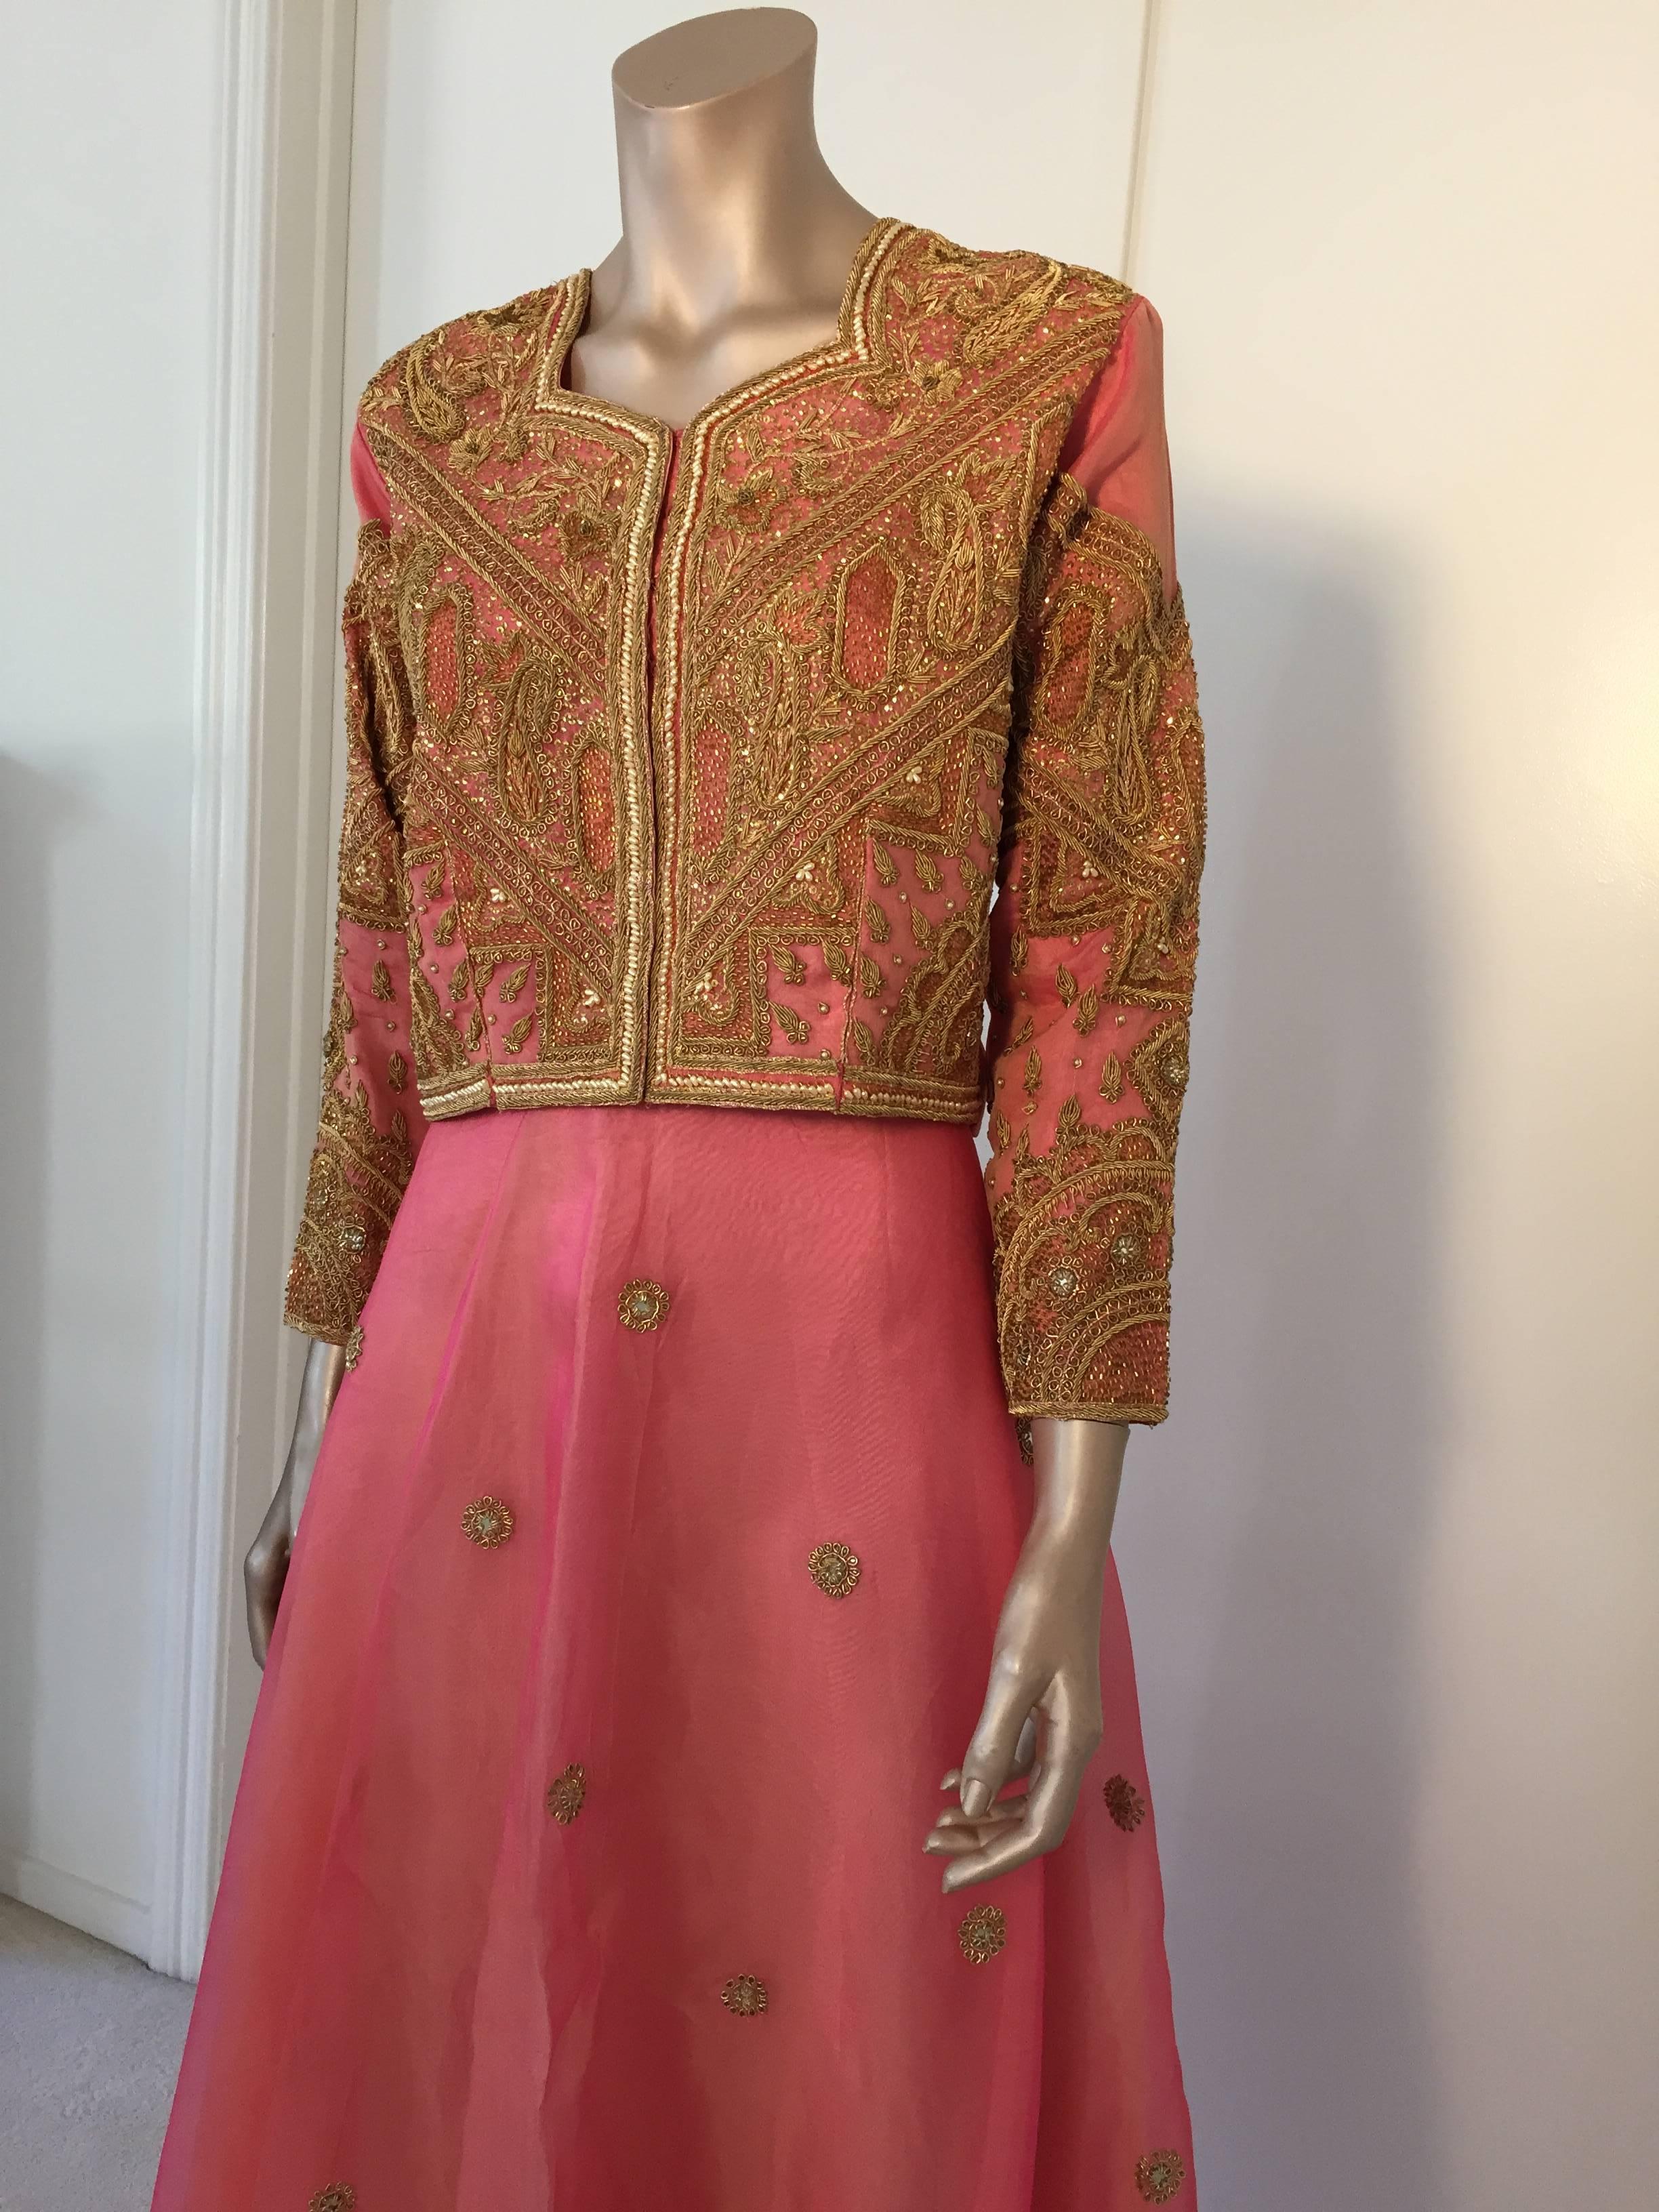 Embroidered Pink and Gold Silk Evening 3 Pieces Gown Vest and Skirt and Shawl For Sale 2